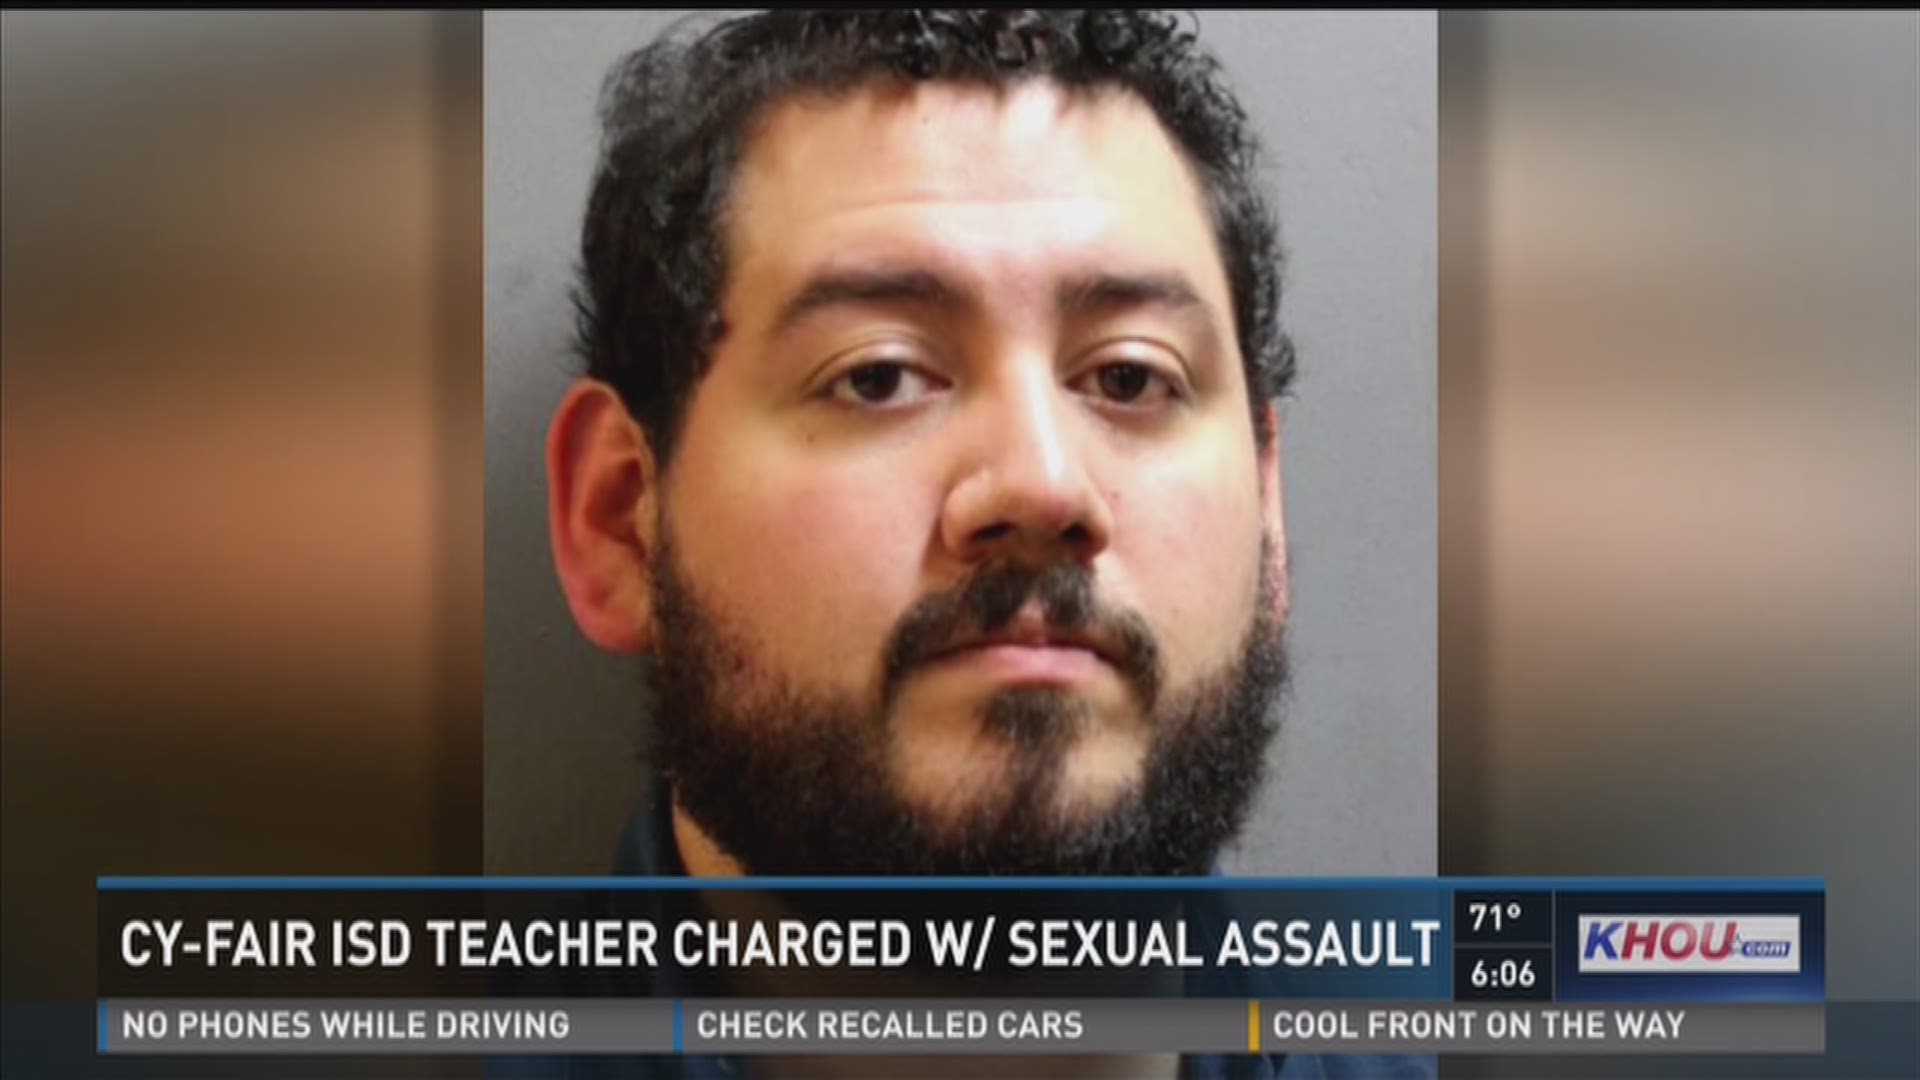 A Cypress Ridge High School teacher is accused of having an inappropriate relationship with a student.